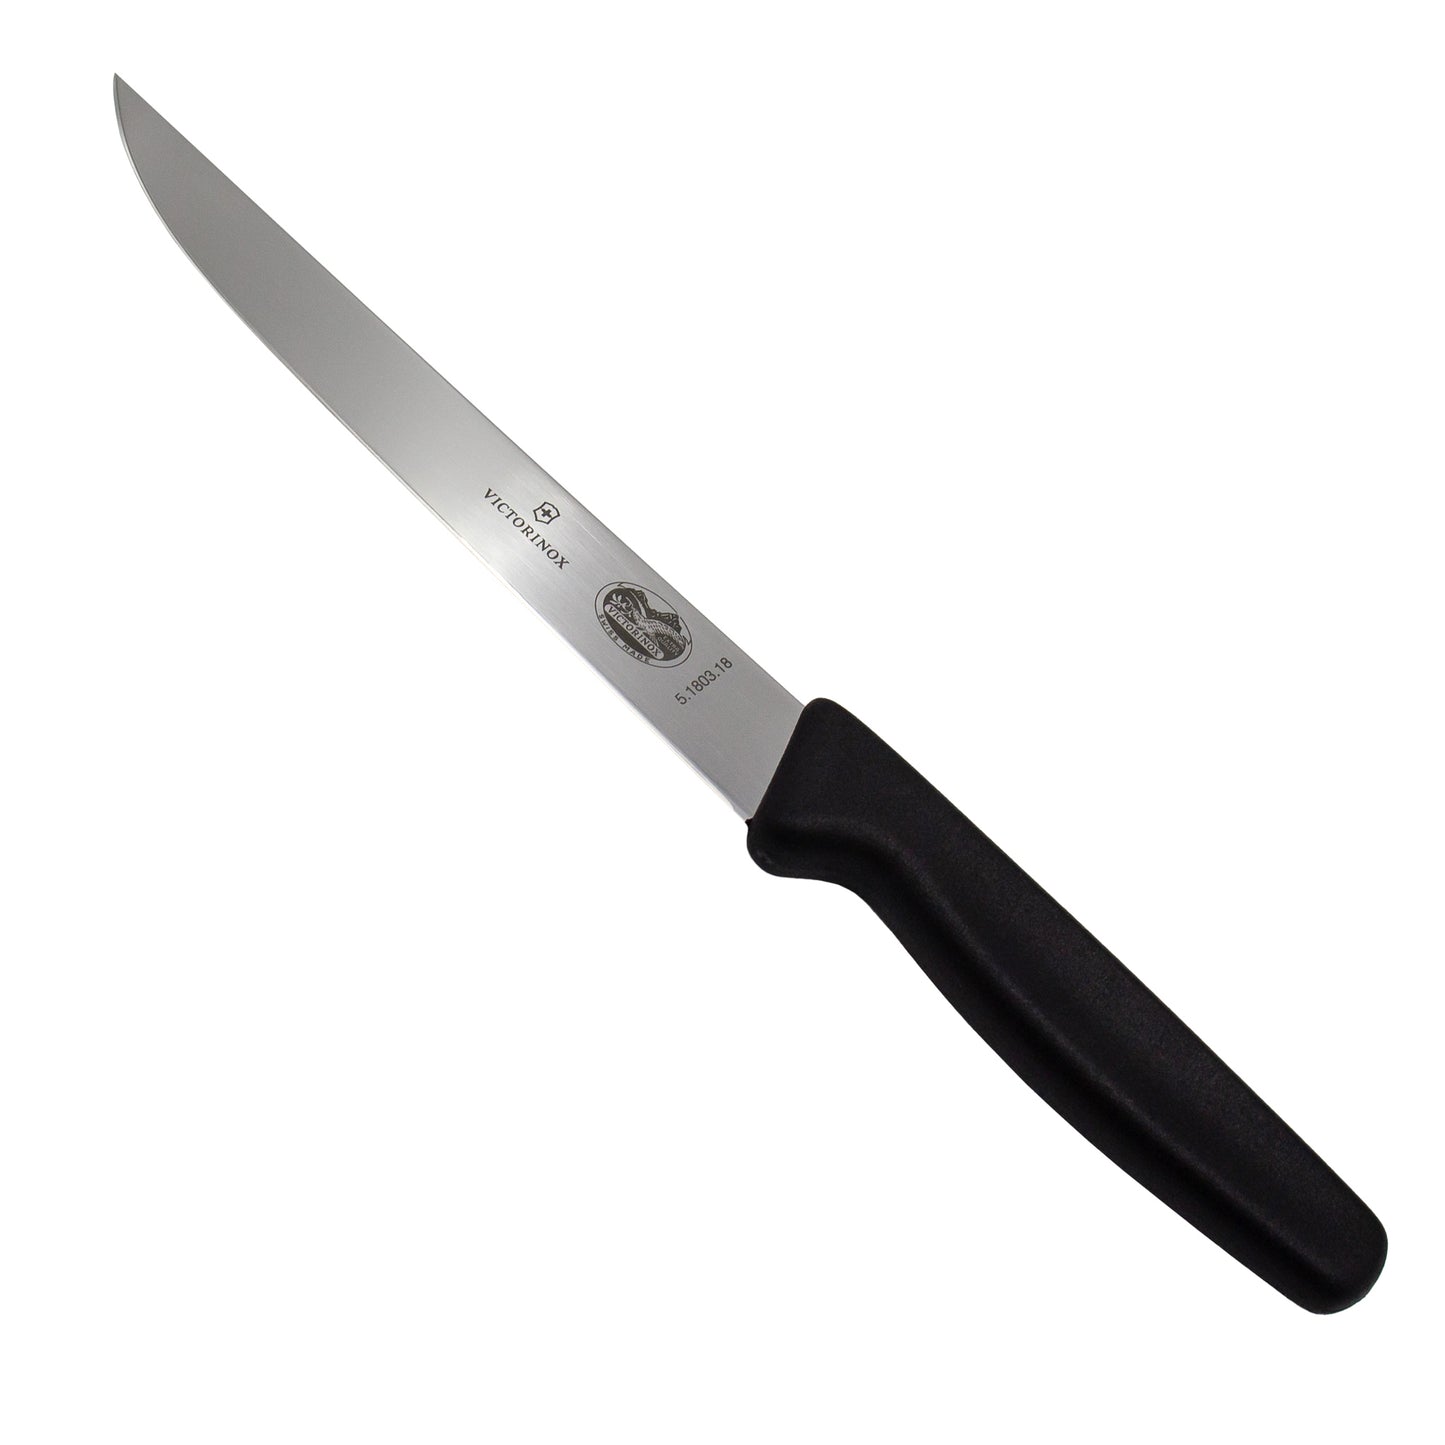 18cm carving knife with back handle. 